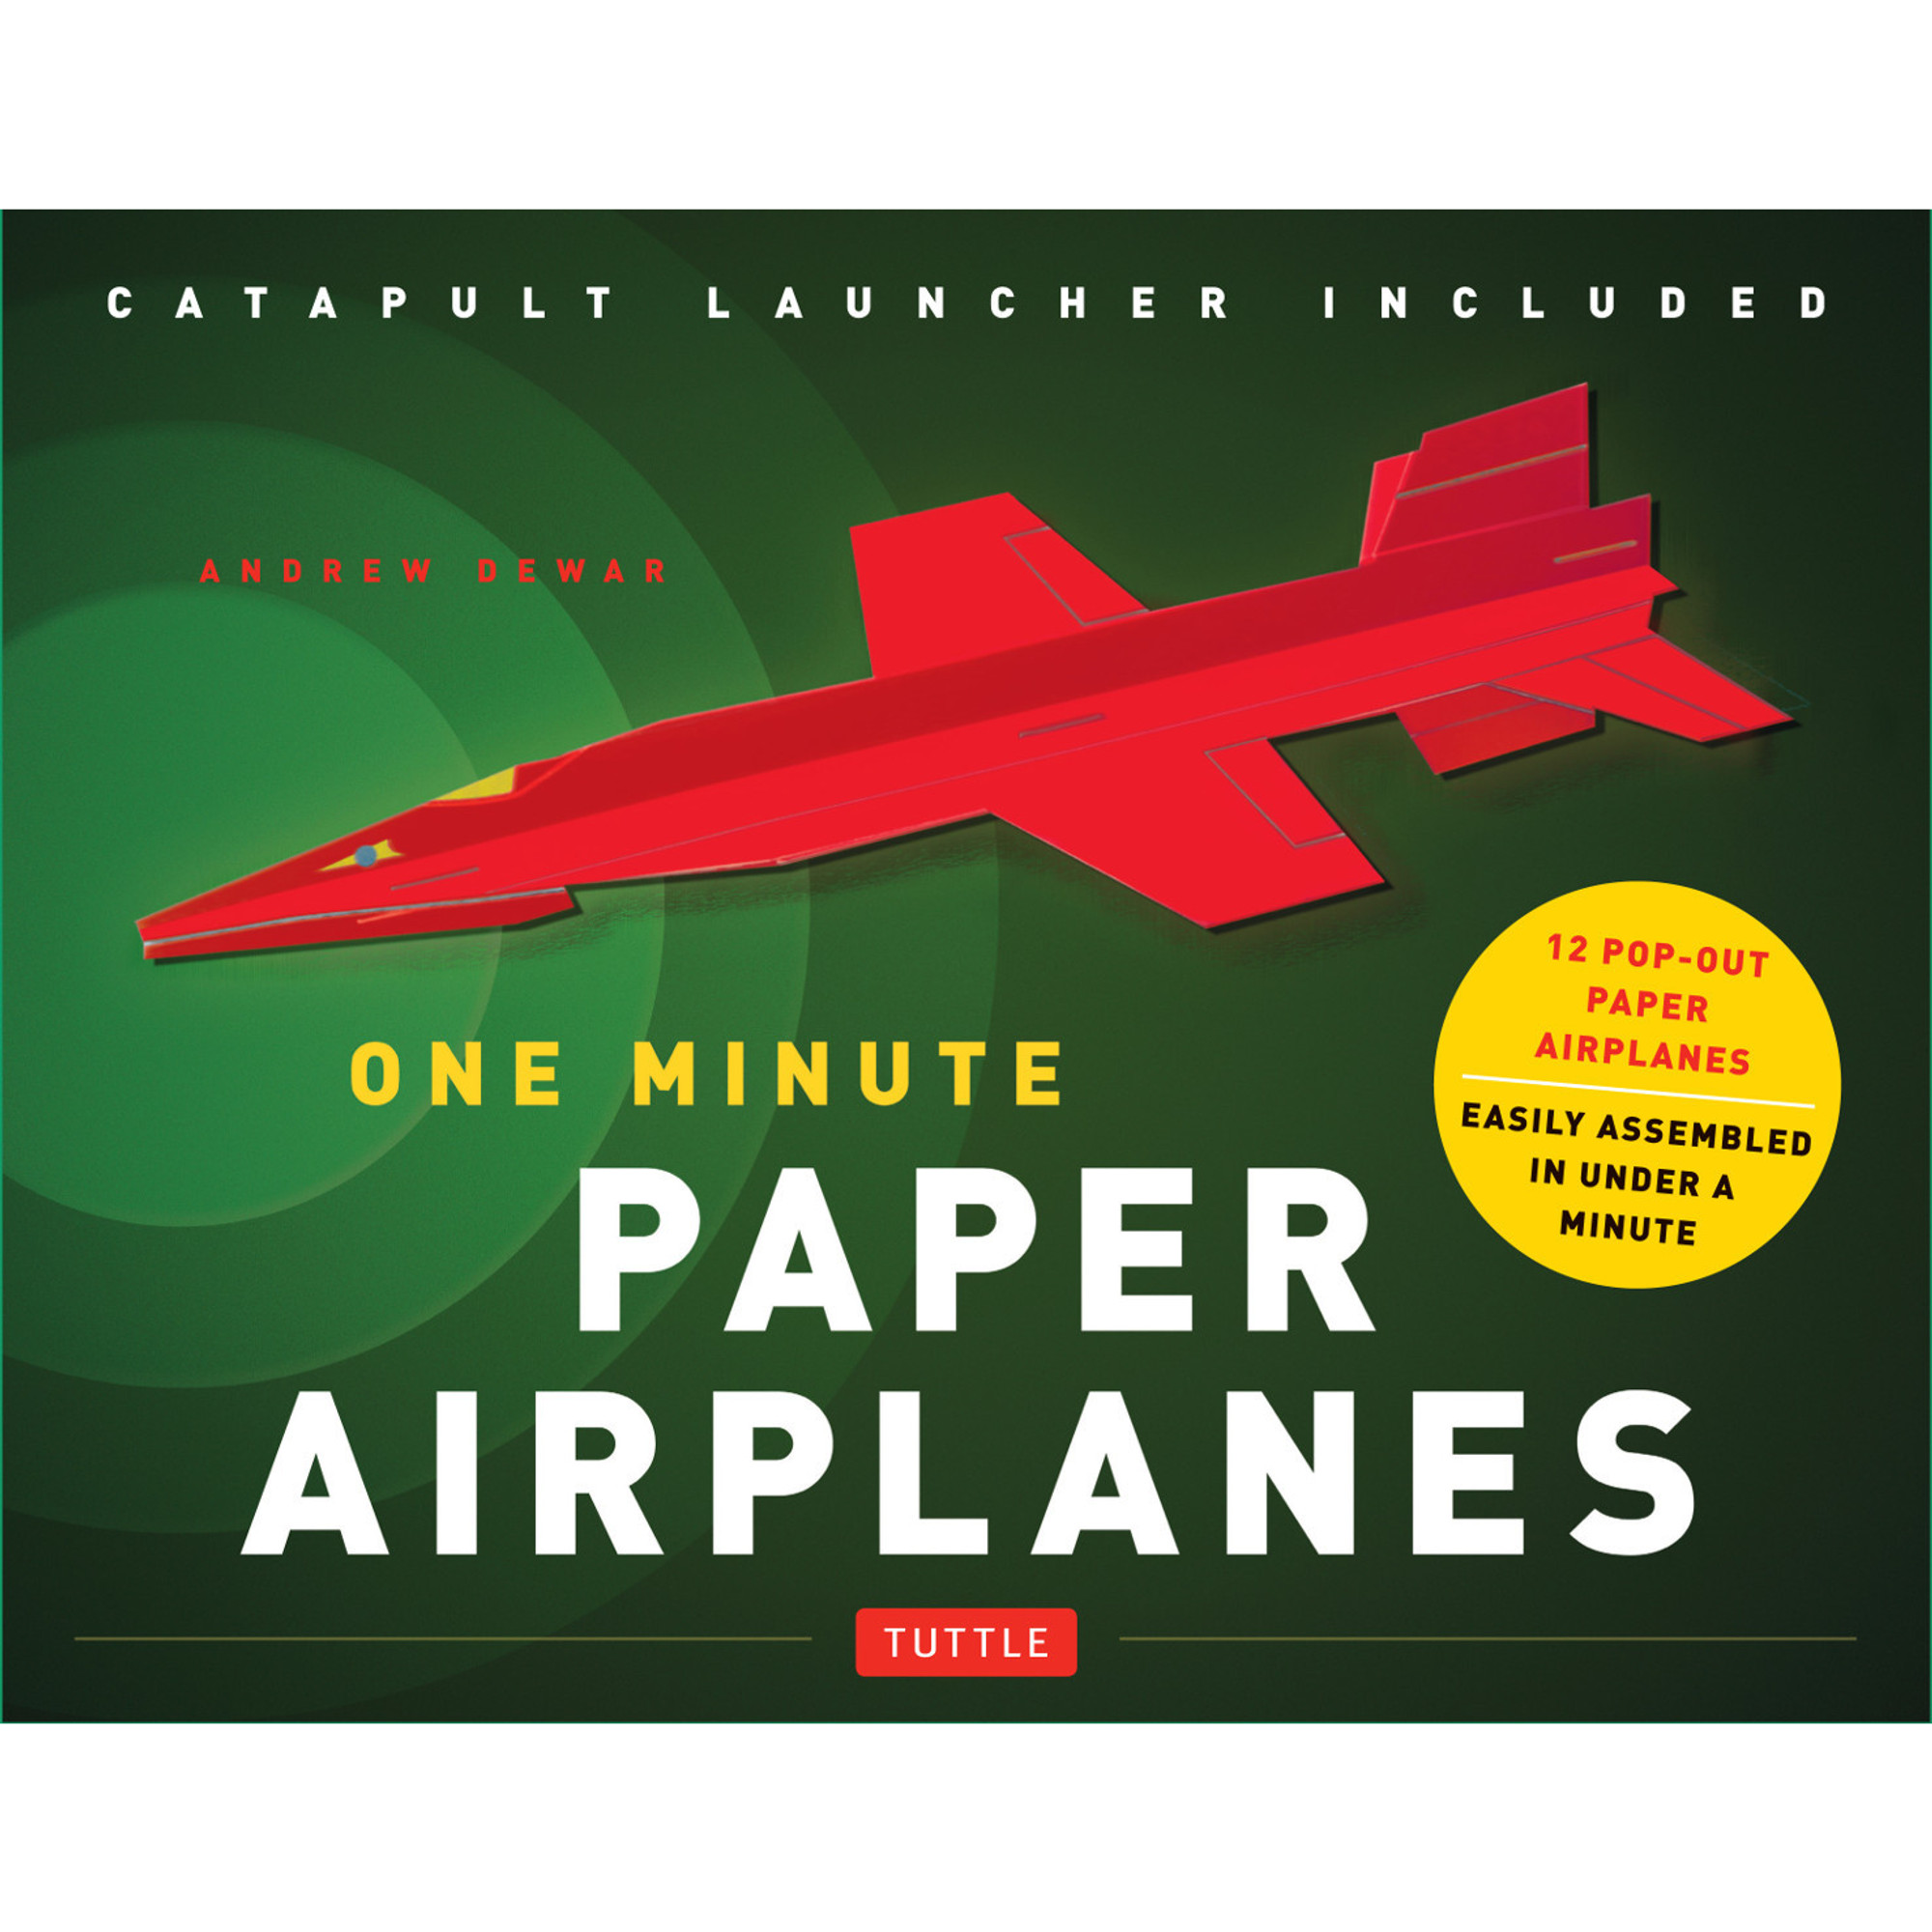 One Minute Paper Airplanes Kit (9780804844550)